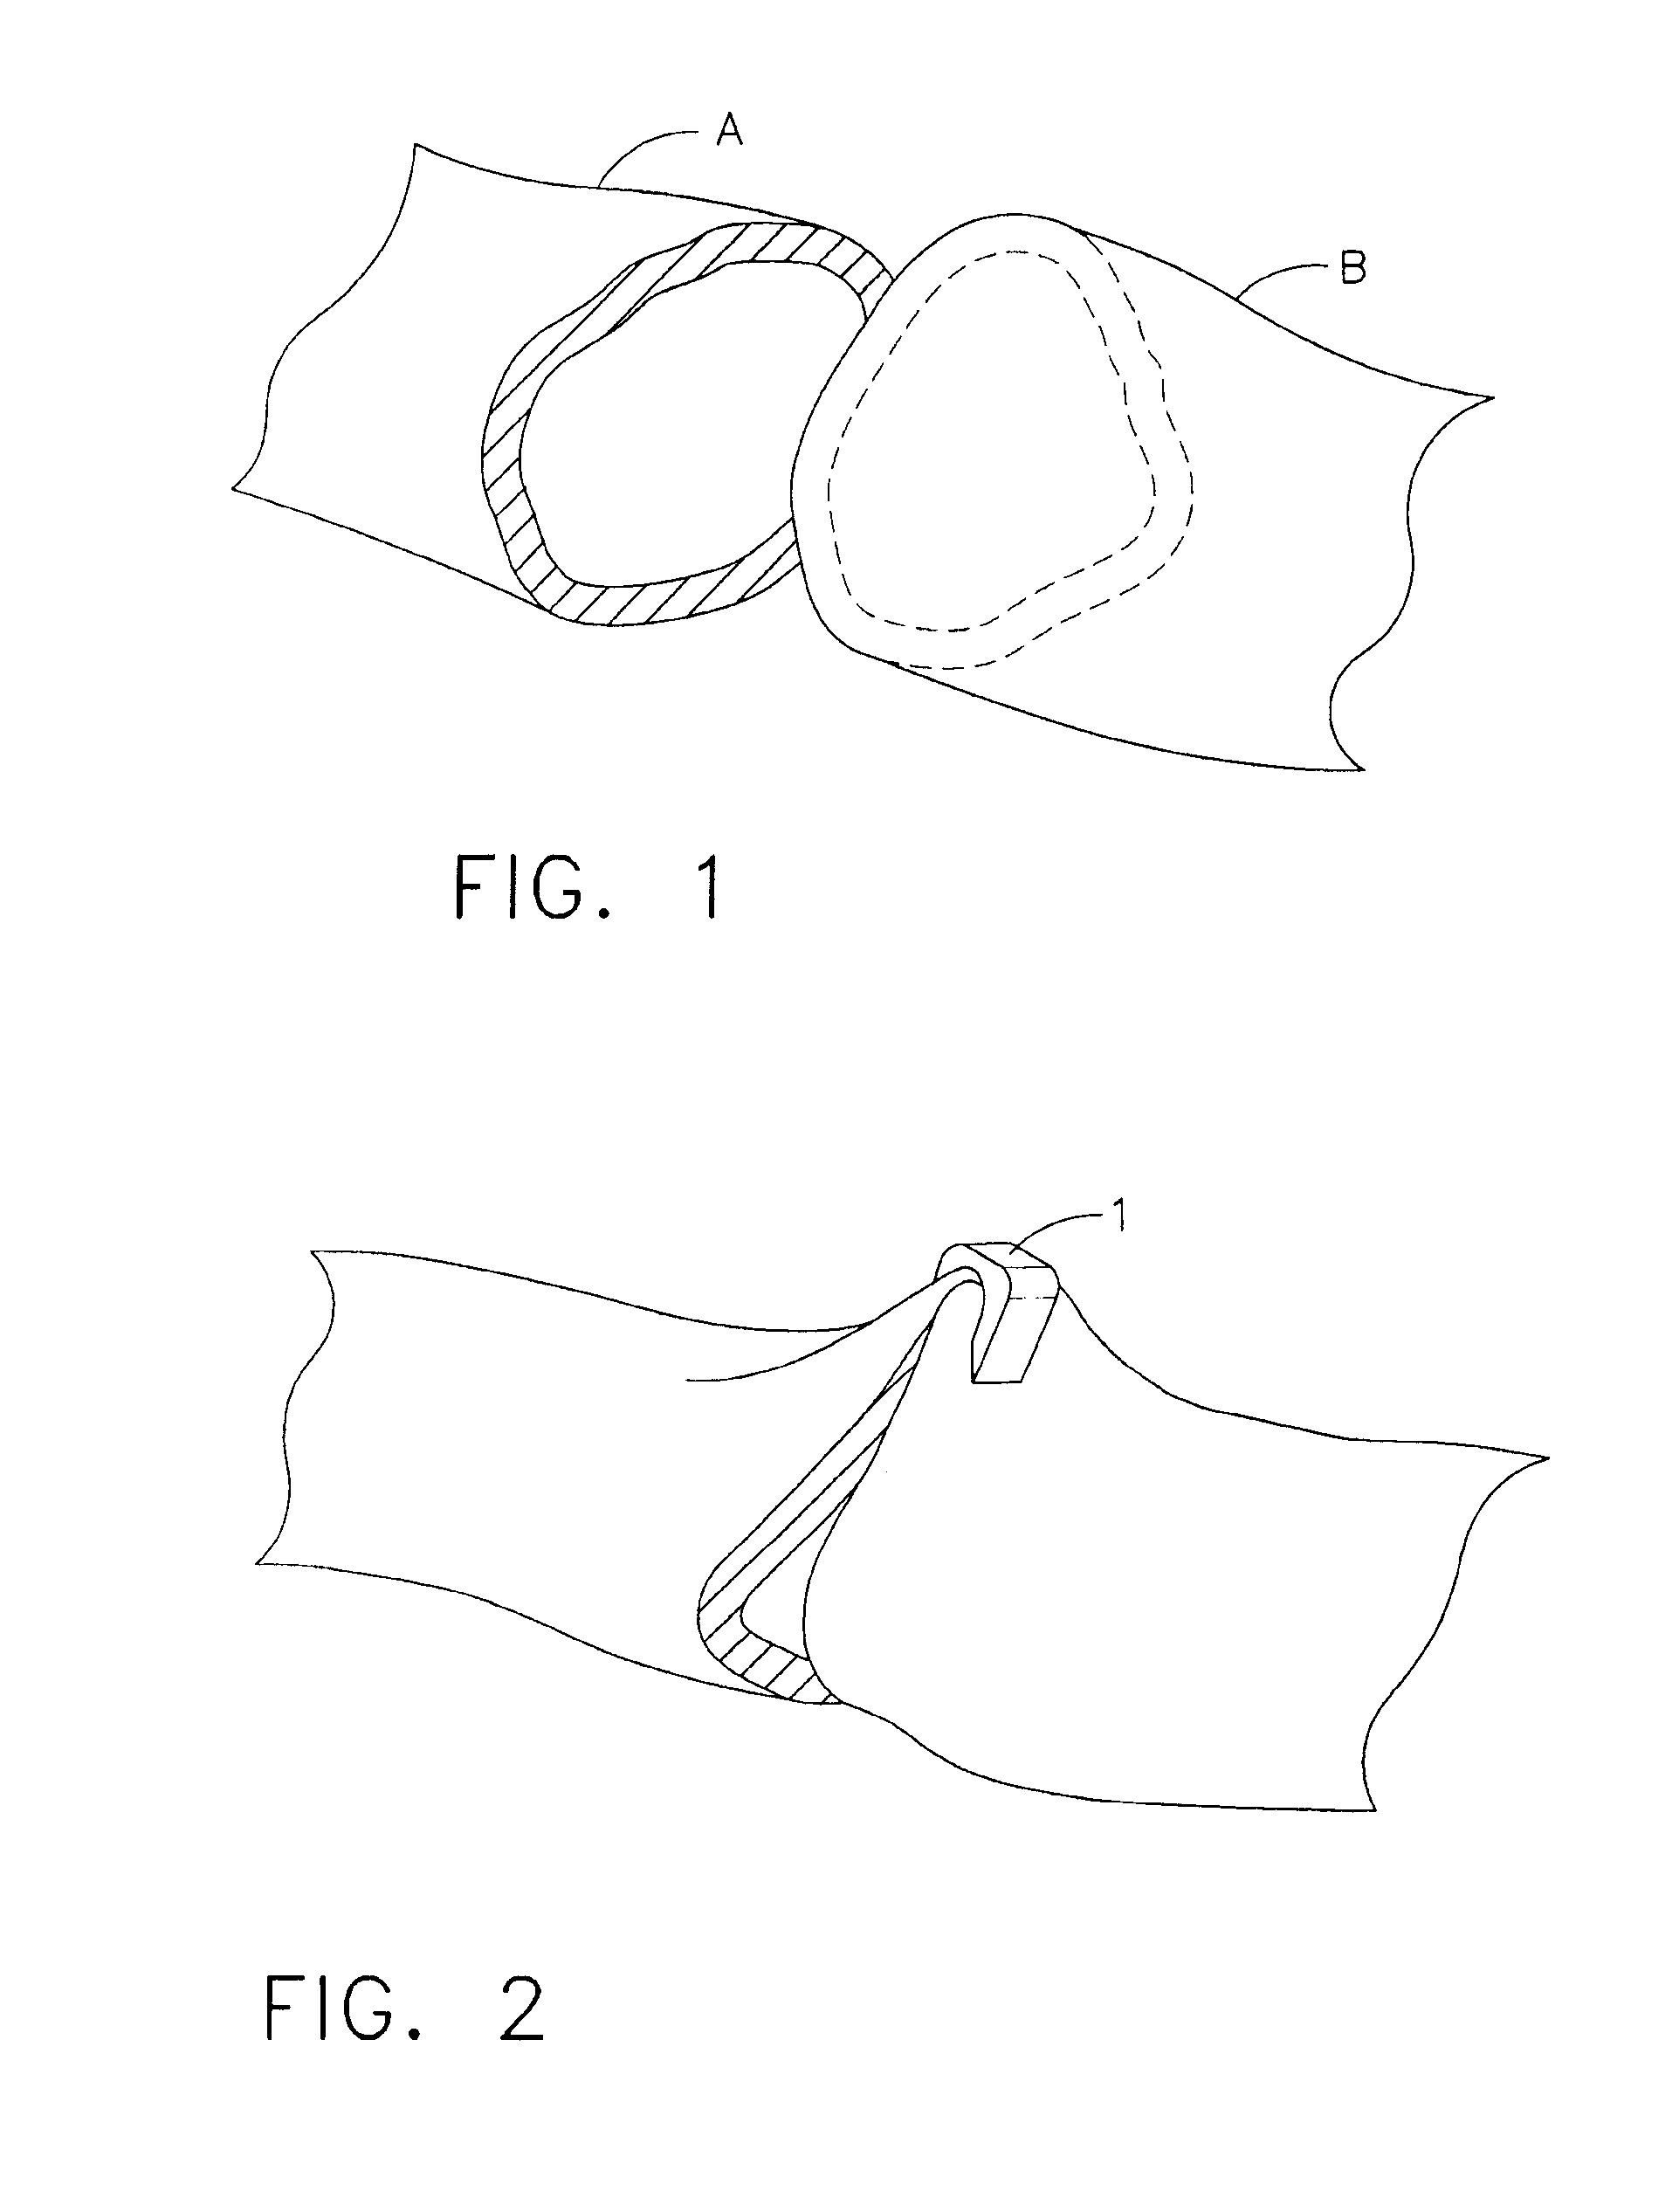 Method and Device for Effecting Anastomosis of Hollow Organ Structures Using Adhesive and Fasteners